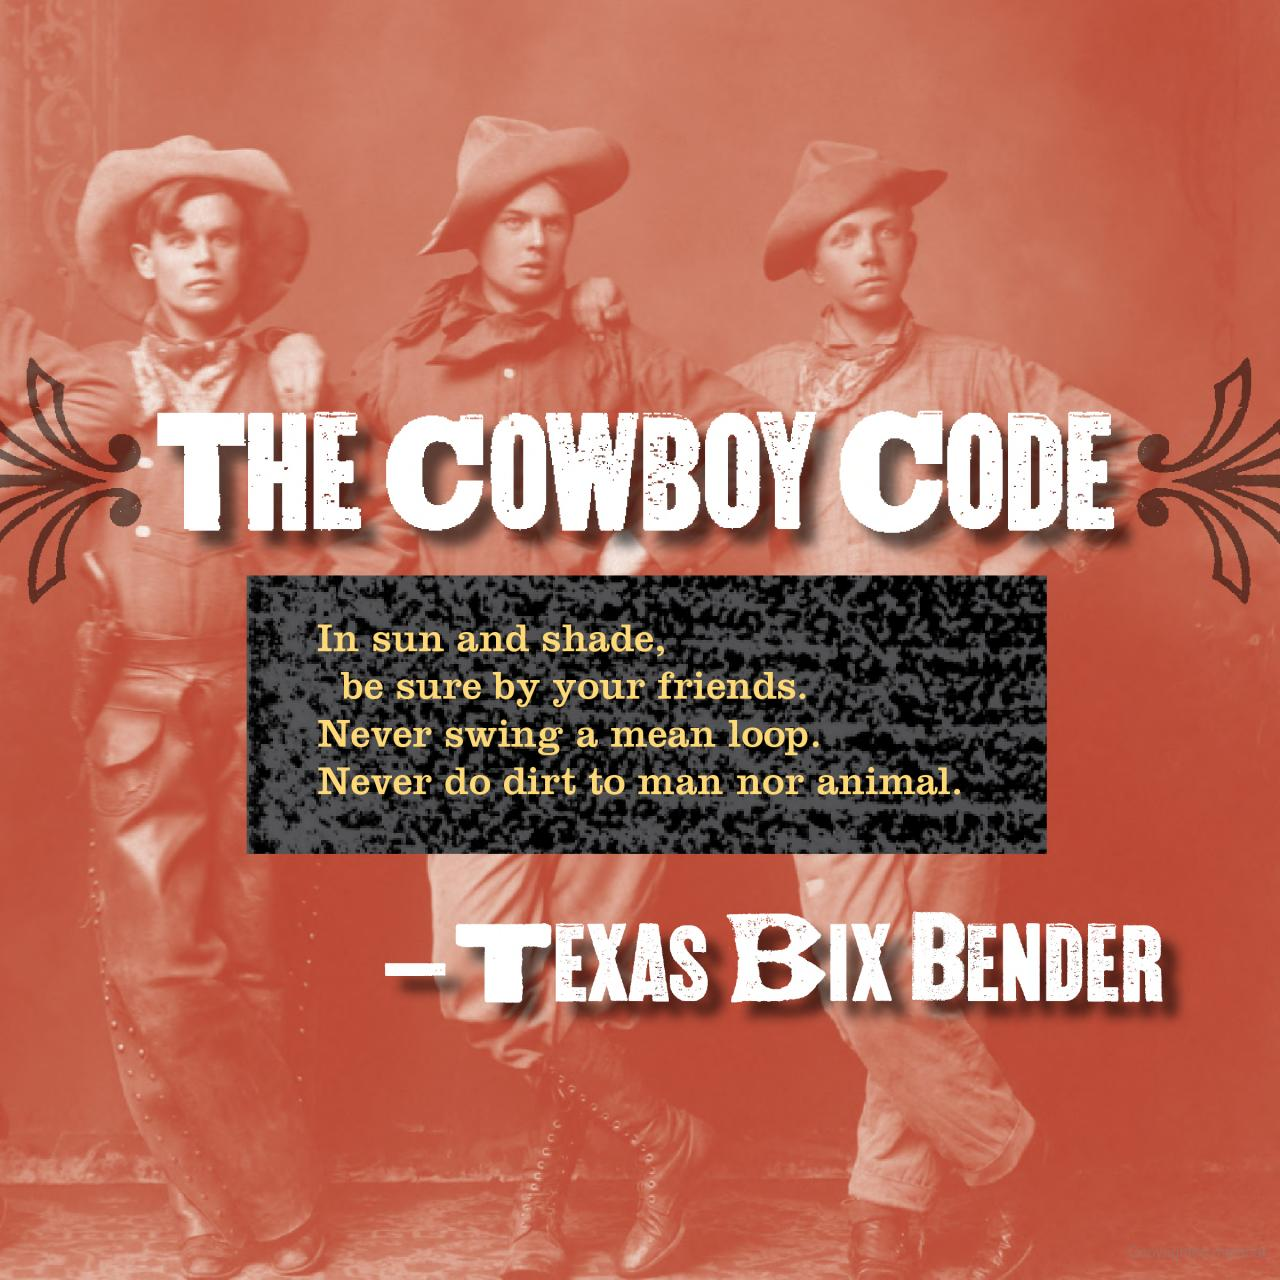 How To Be A Cowboy by Jim Arndt